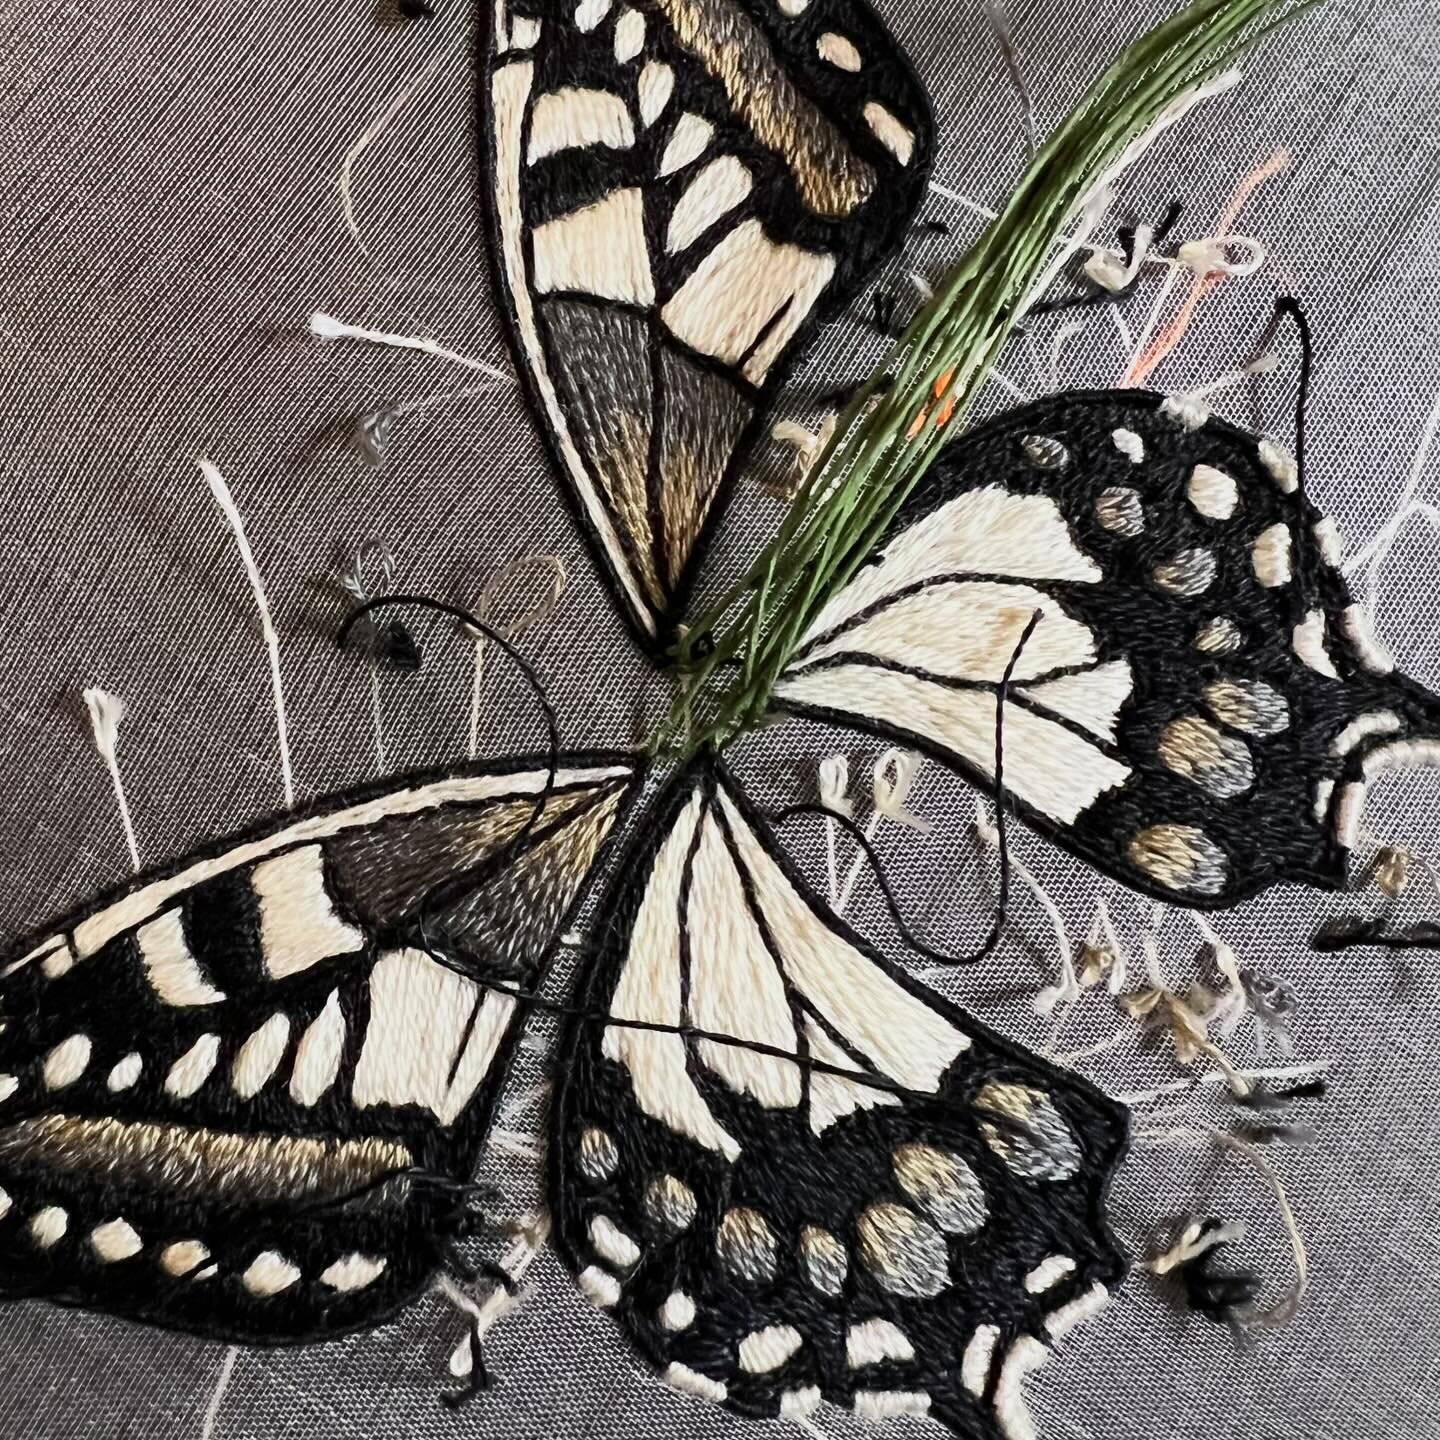 Working on something super exciting 💛 any ideas what this might be? 🧡

#butterfly #butterflygarden #handembroidery #handembroidered #spring #floral #goldworkembroidery #stumpworkembroidery #handandlock #nature #stitch #sewing #embroidery #embroider